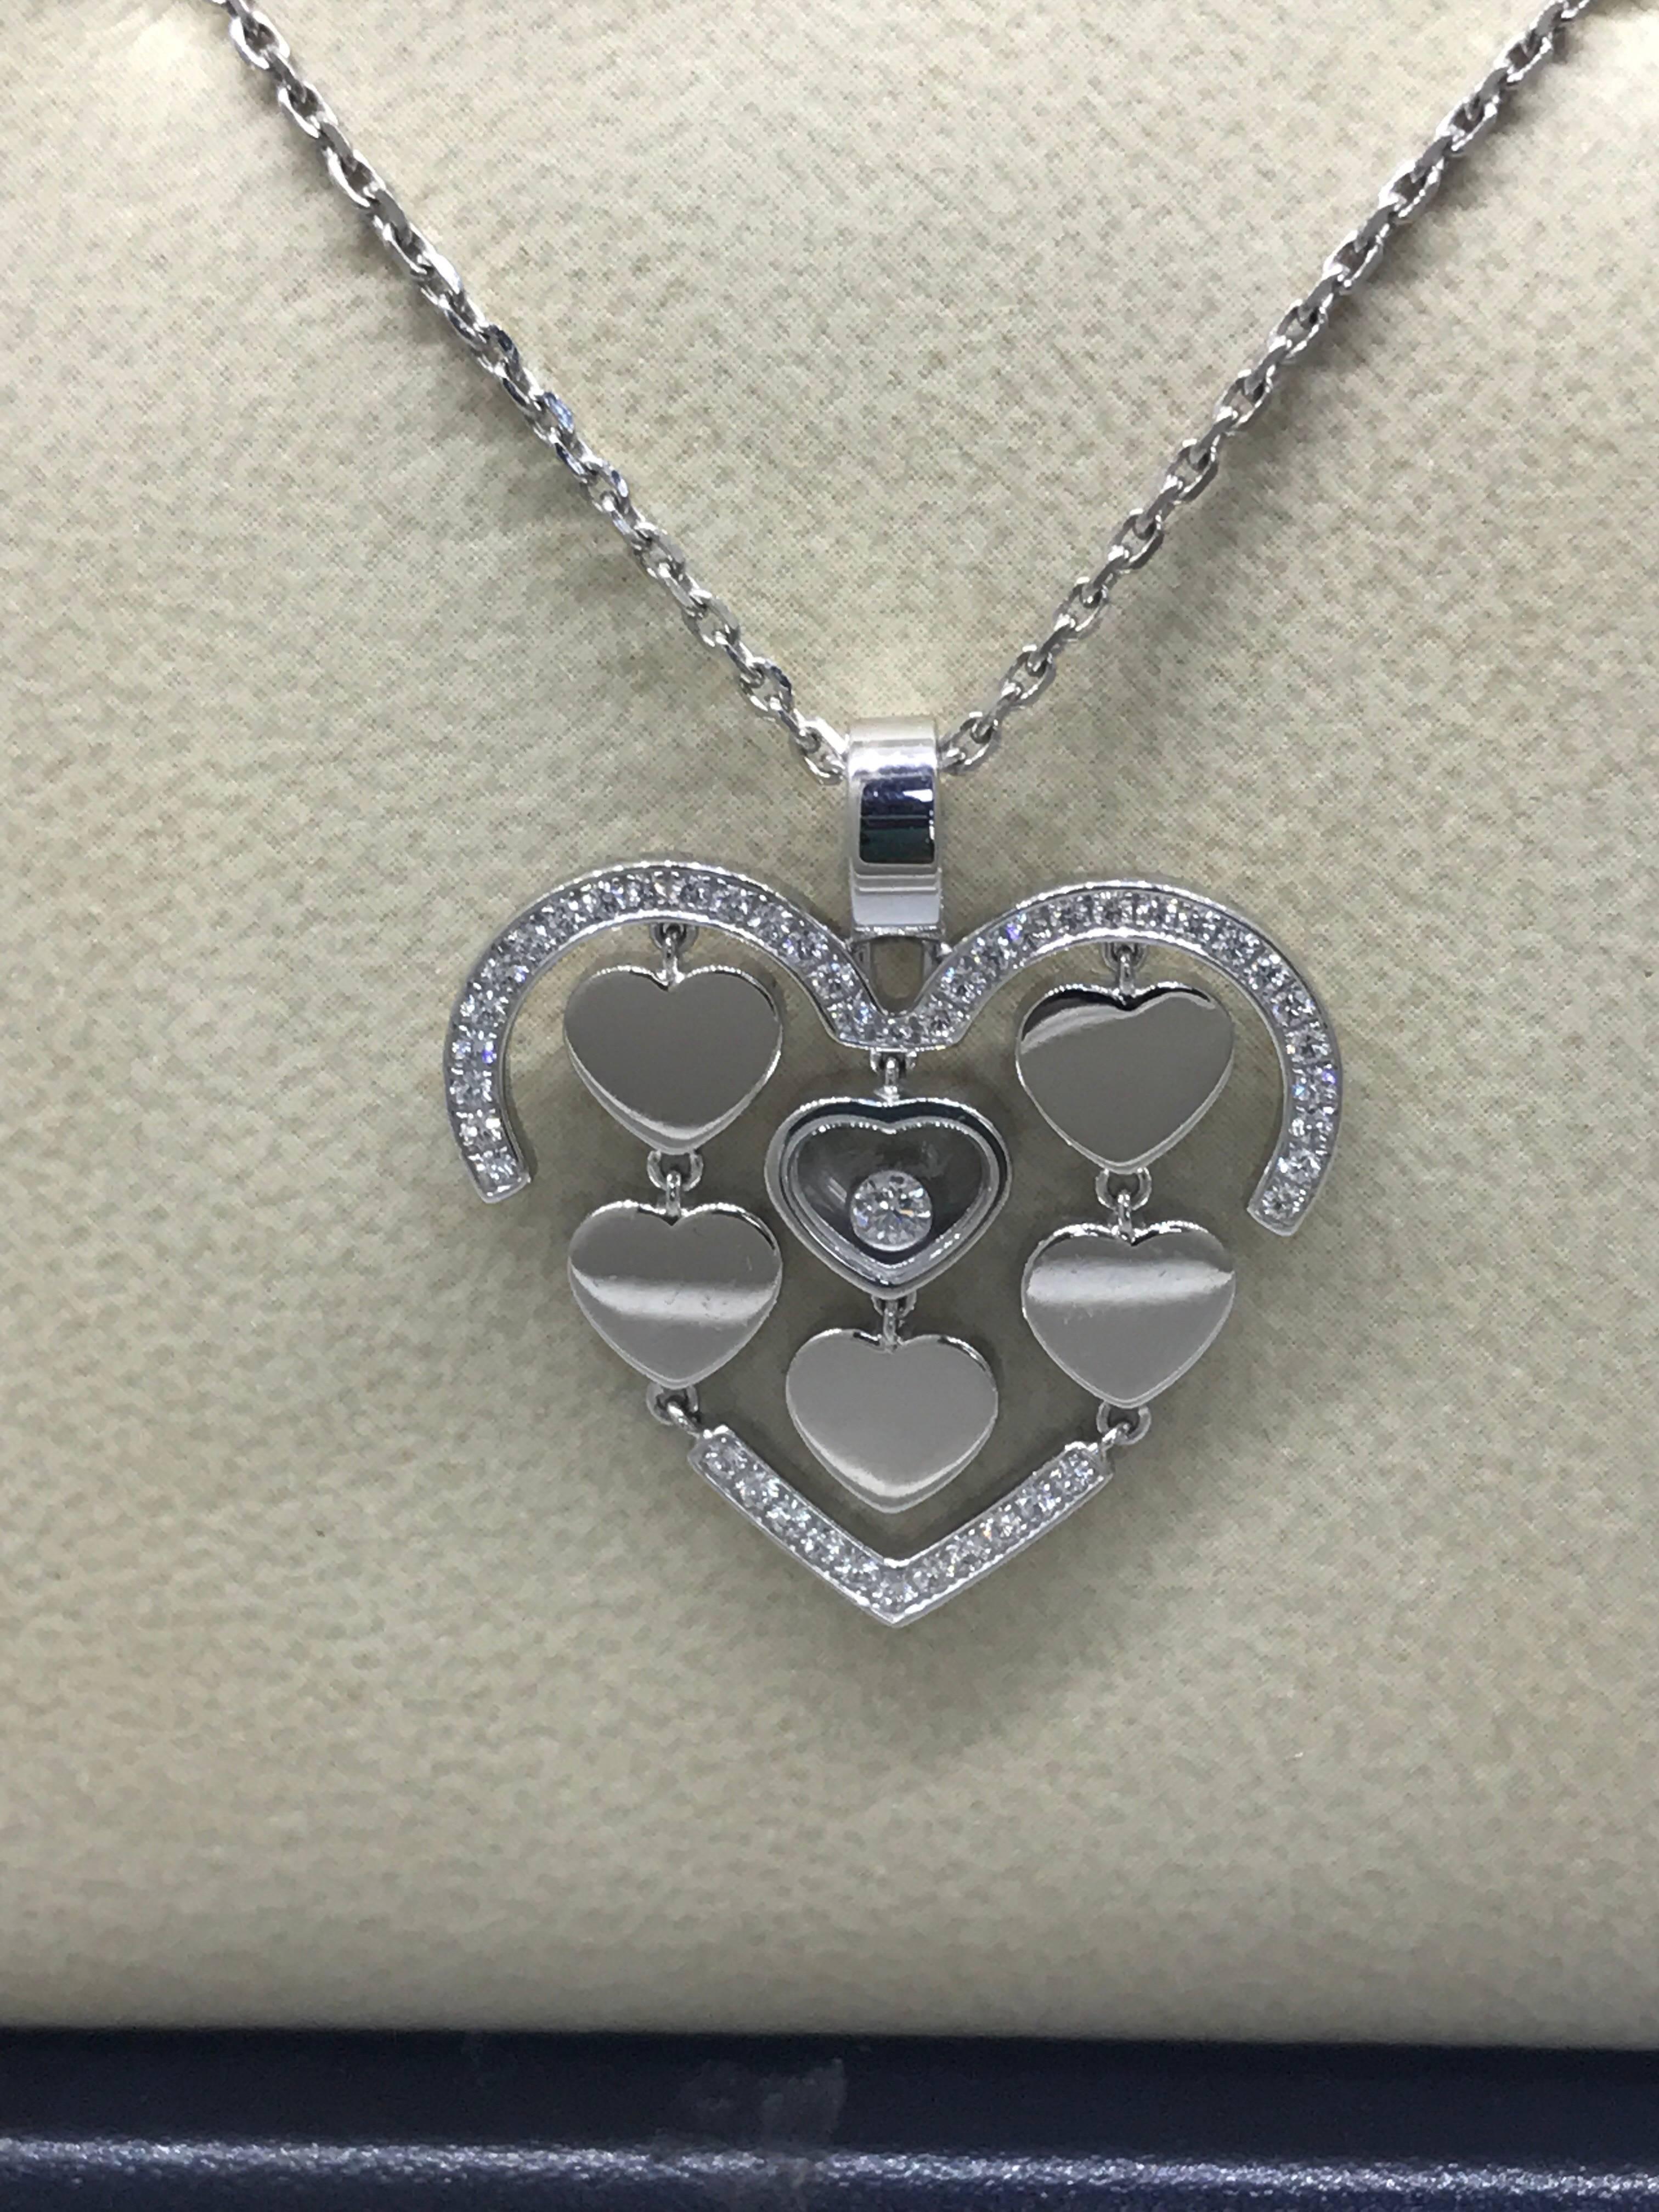 Women's Chopard Amore Hearts 18 Karat White Gold and Diamond Pendant / Necklace 79/7219 For Sale